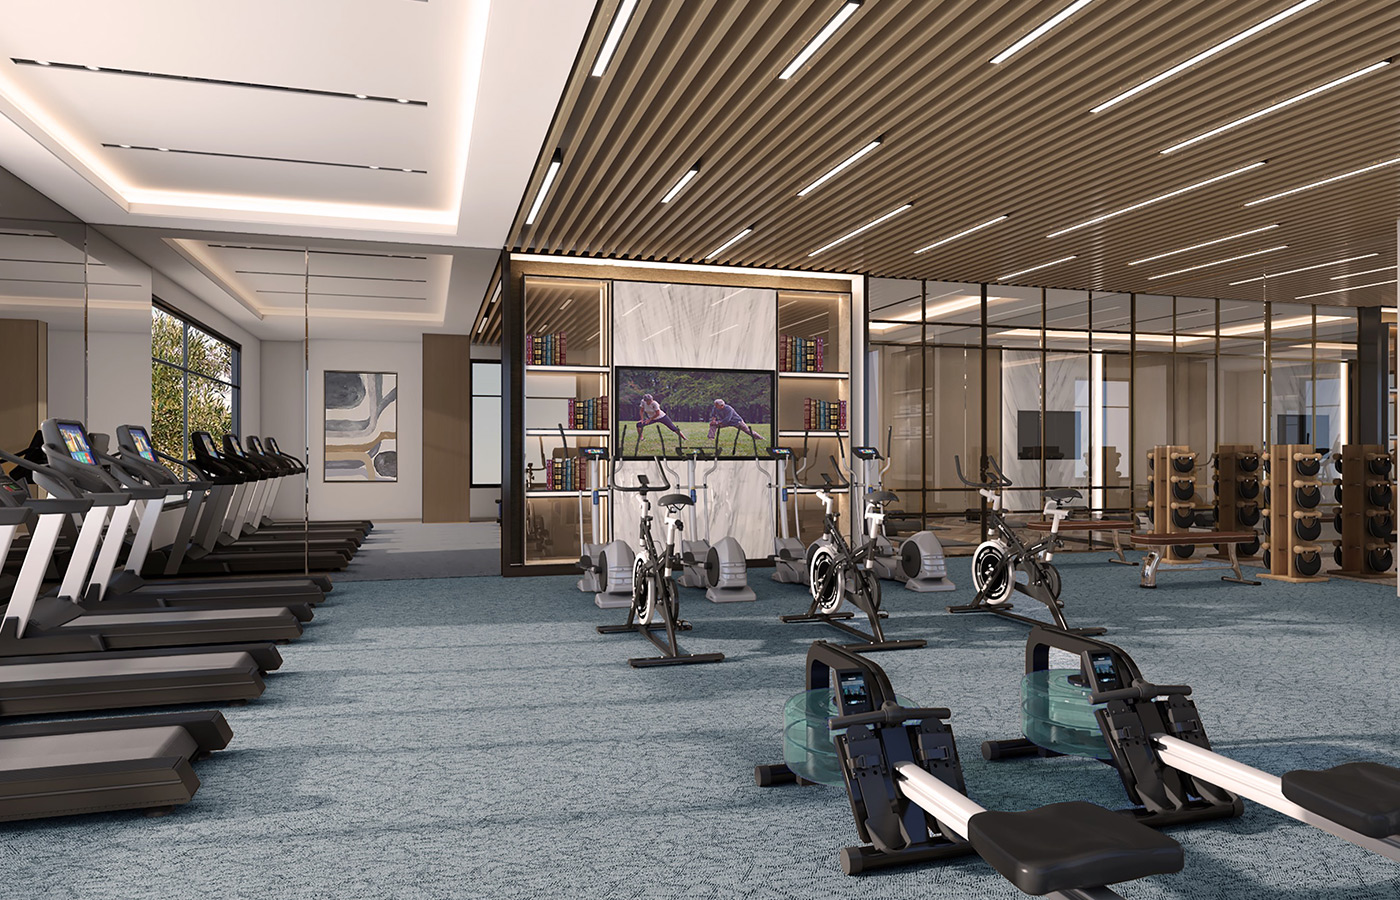 The fitness area at The Watermark at West Palm Beach.